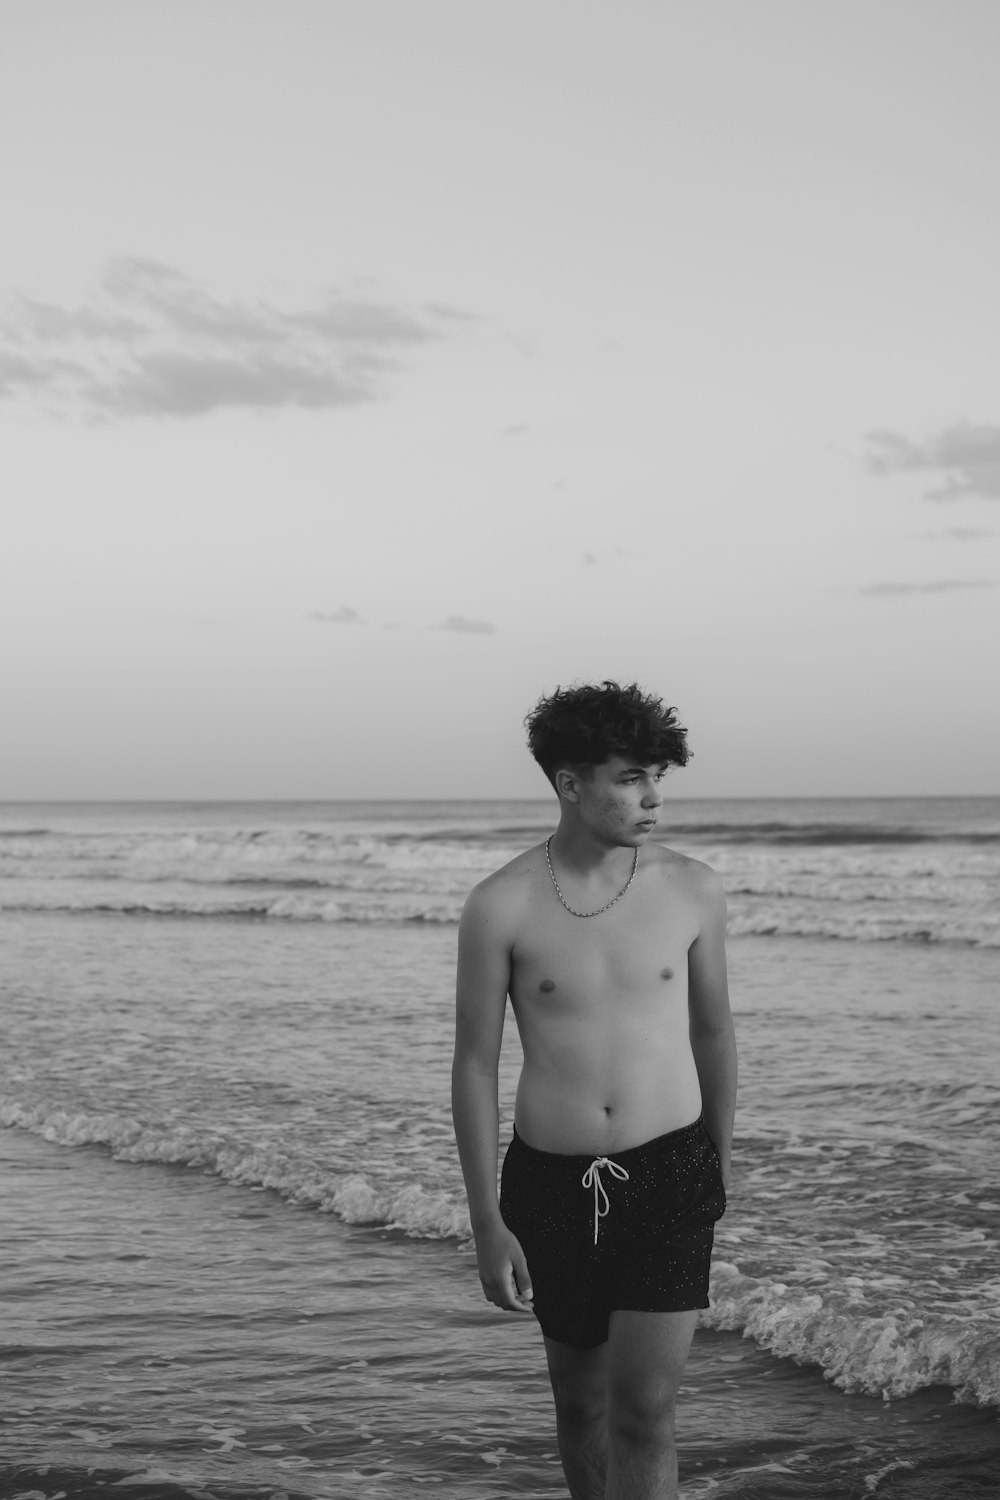 a shirtless man standing on a beach next to the ocean